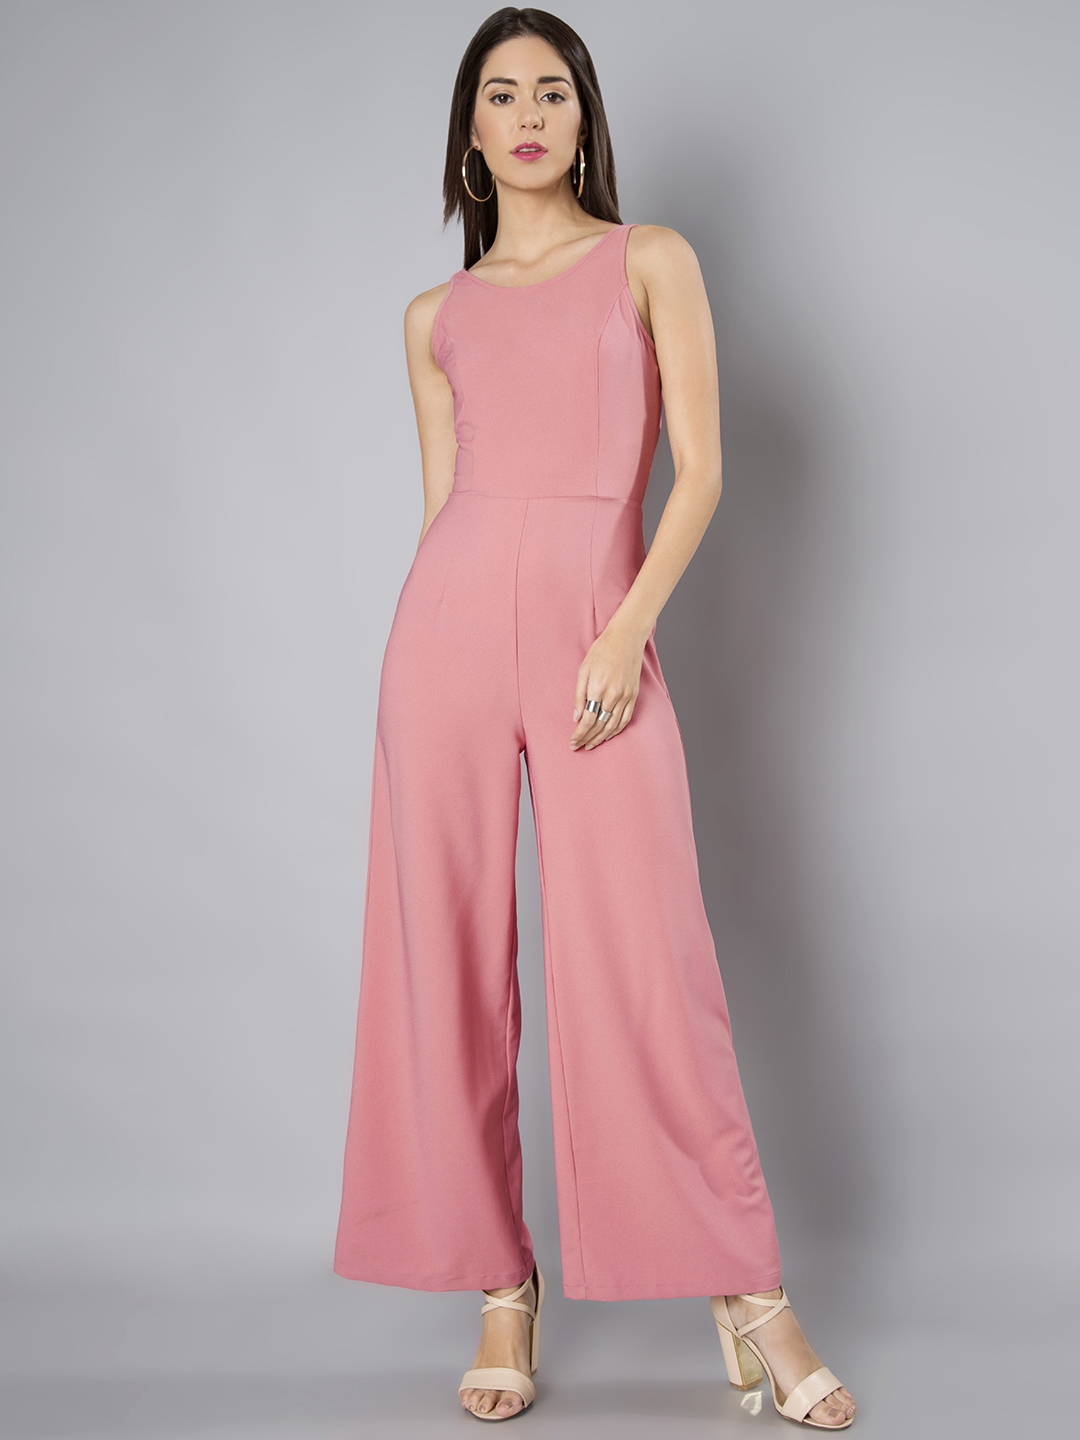 Buy One Piece Dresses for Girls Online in India - Myntra-nlmtdanang.com.vn